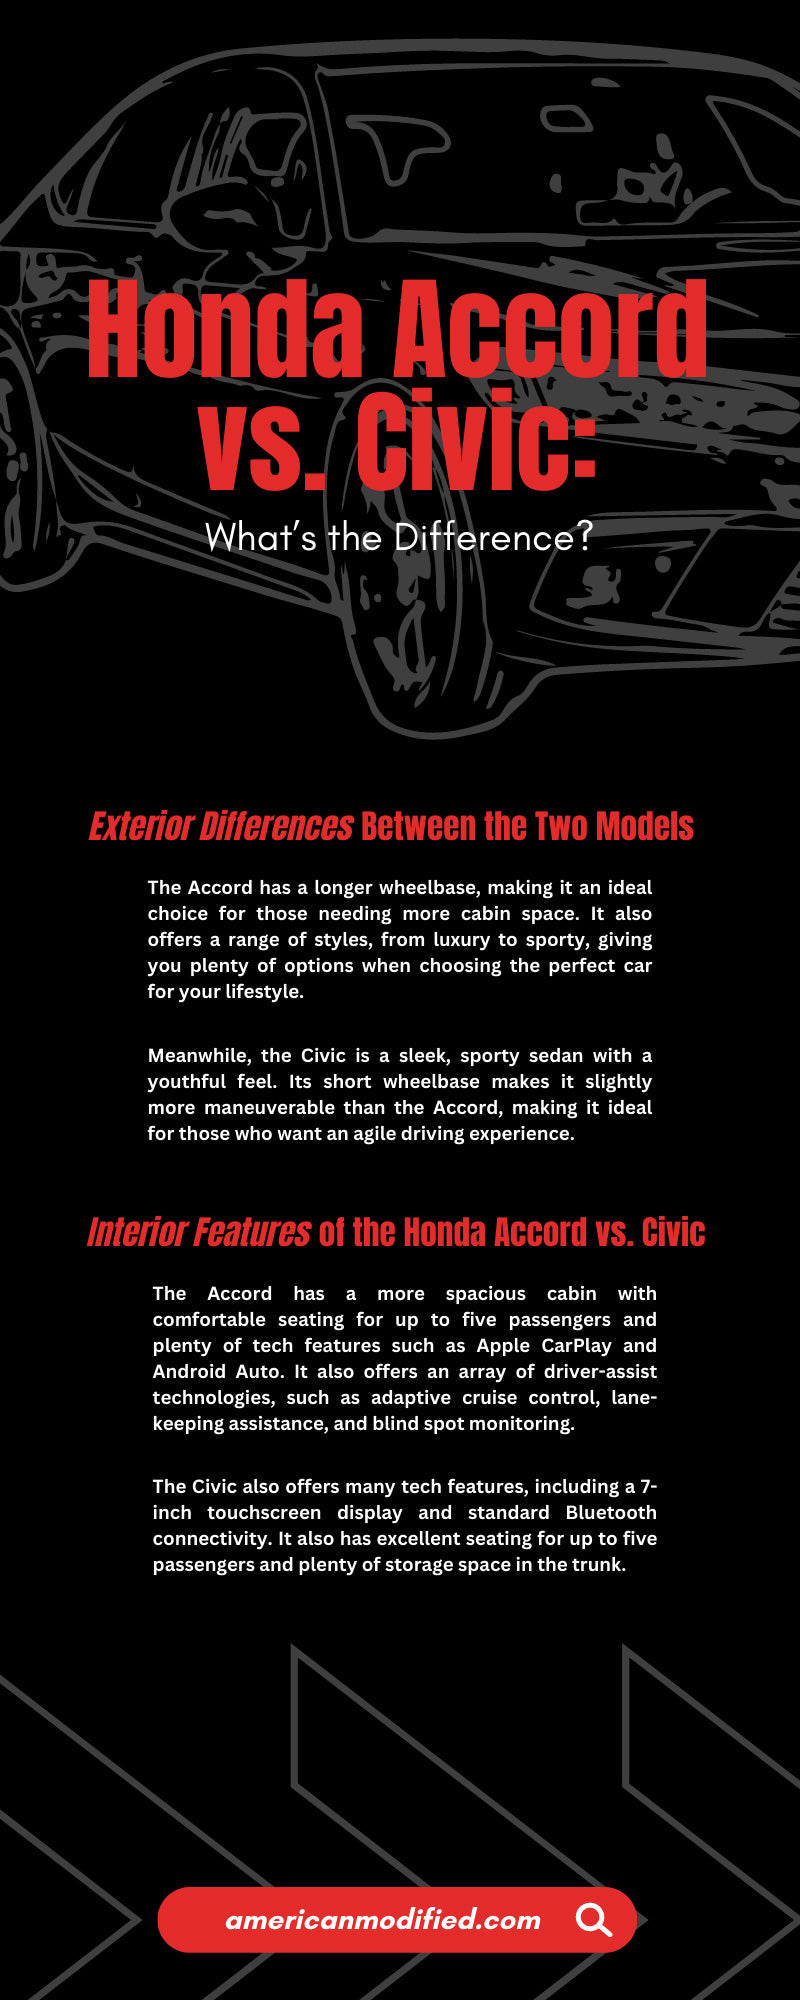 Honda Accord vs. Civic: What’s the Difference?